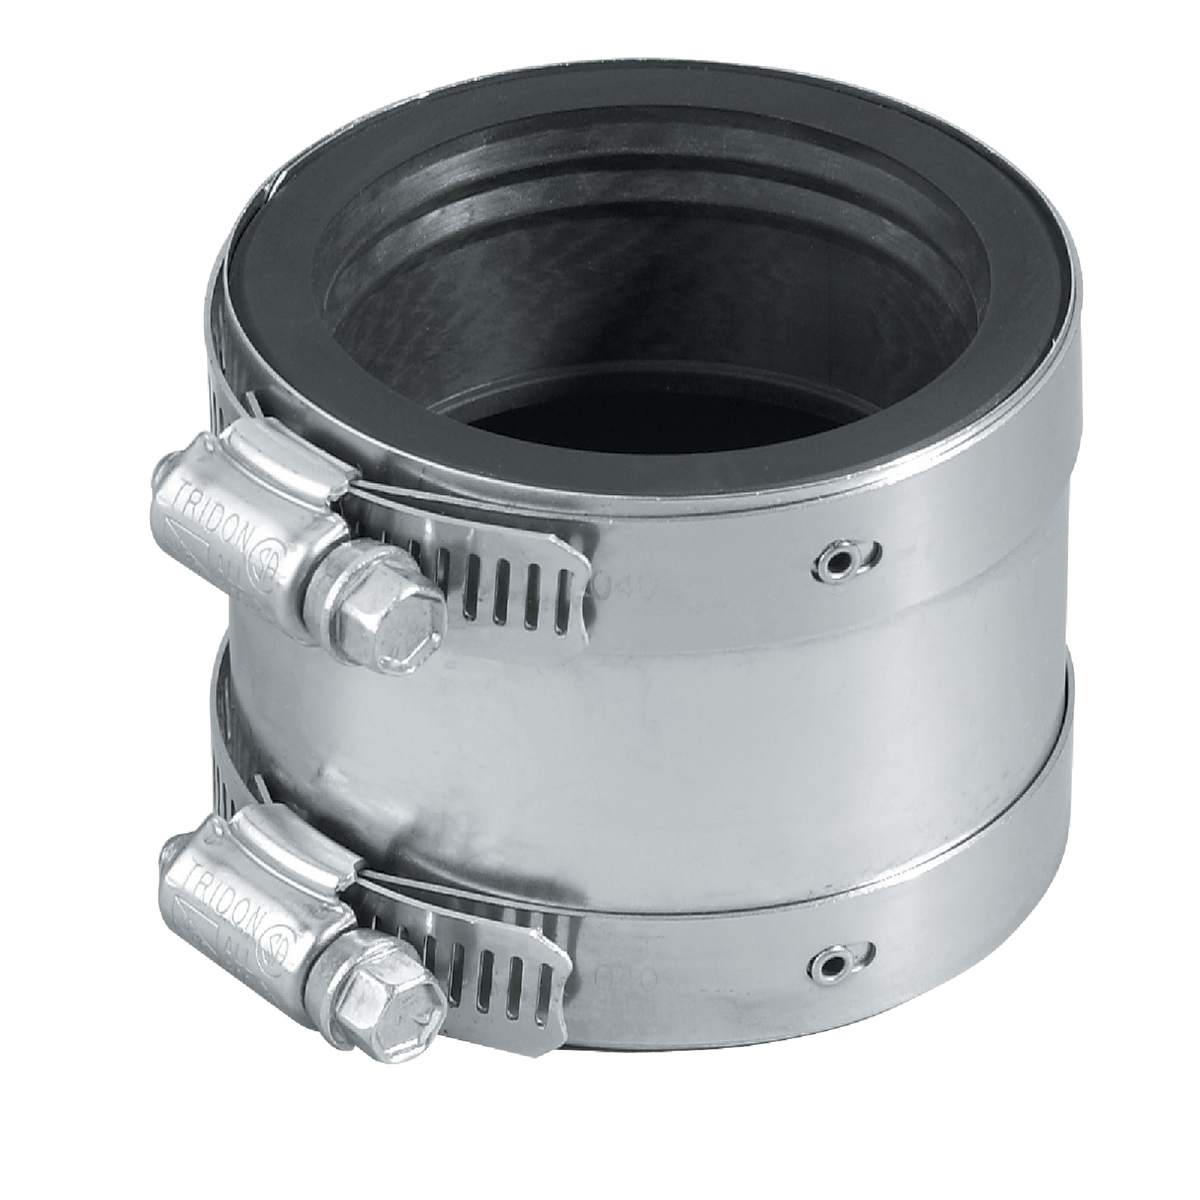 Proflex 2 In. x 2 In. PVC Shielded Coupling - Cast-Iron to Plastic Pvc To Cast Iron Transition Coupling